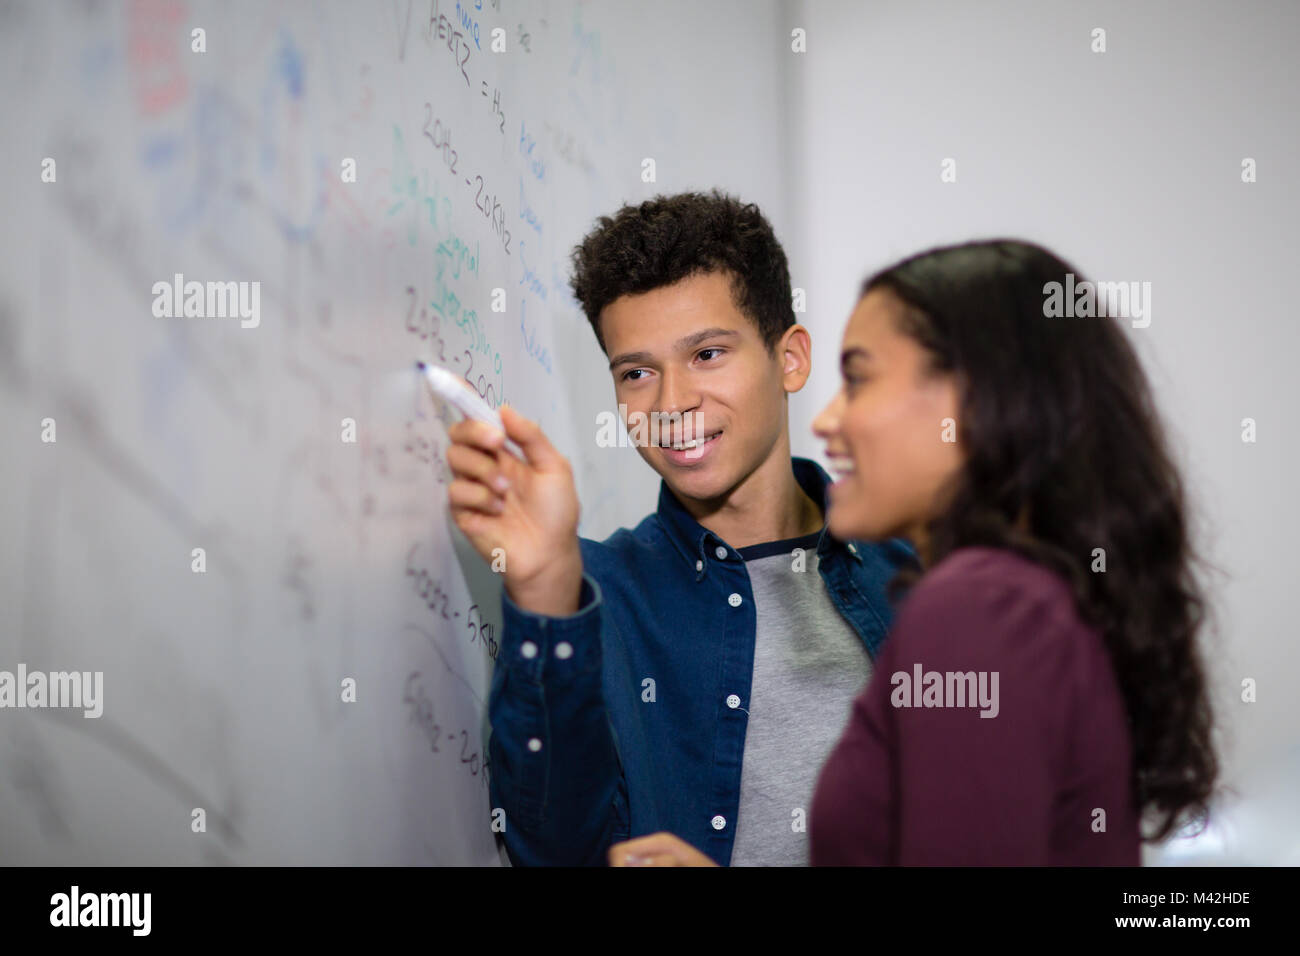 Students at a whiteboard with pen Stock Photo